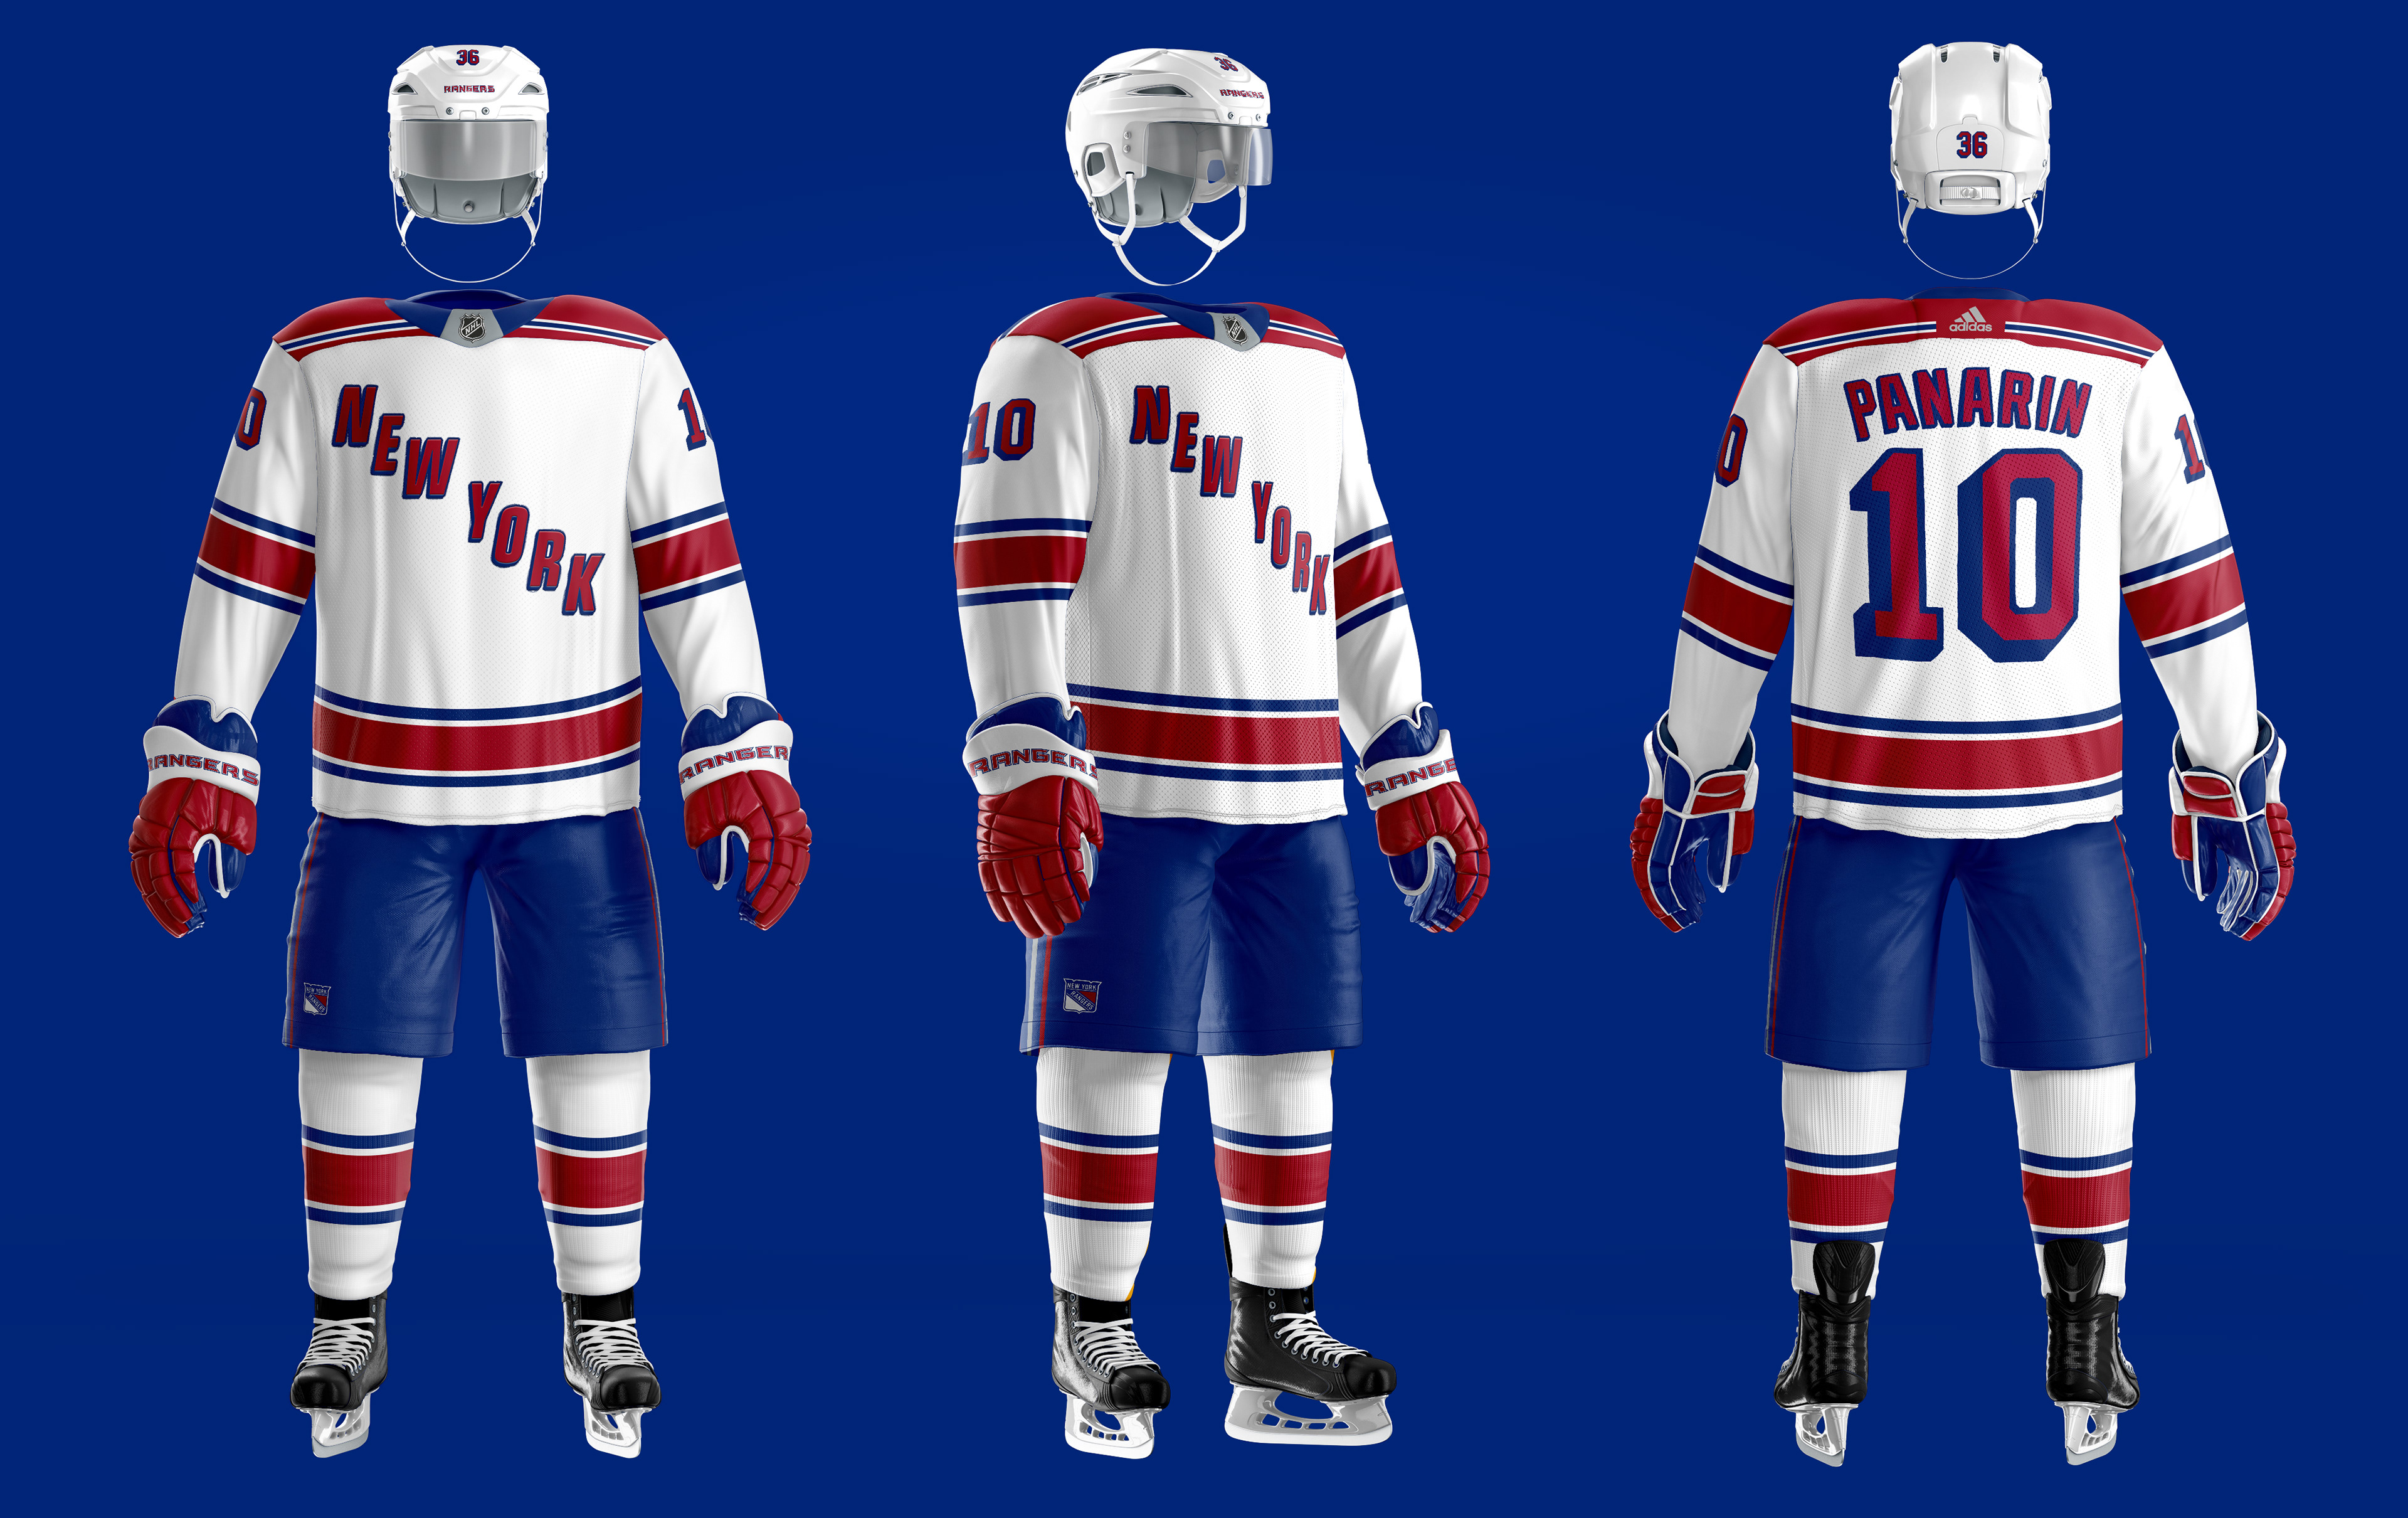 NHL Expansion Series Concept. Cleveland Crusaders Home Uniform